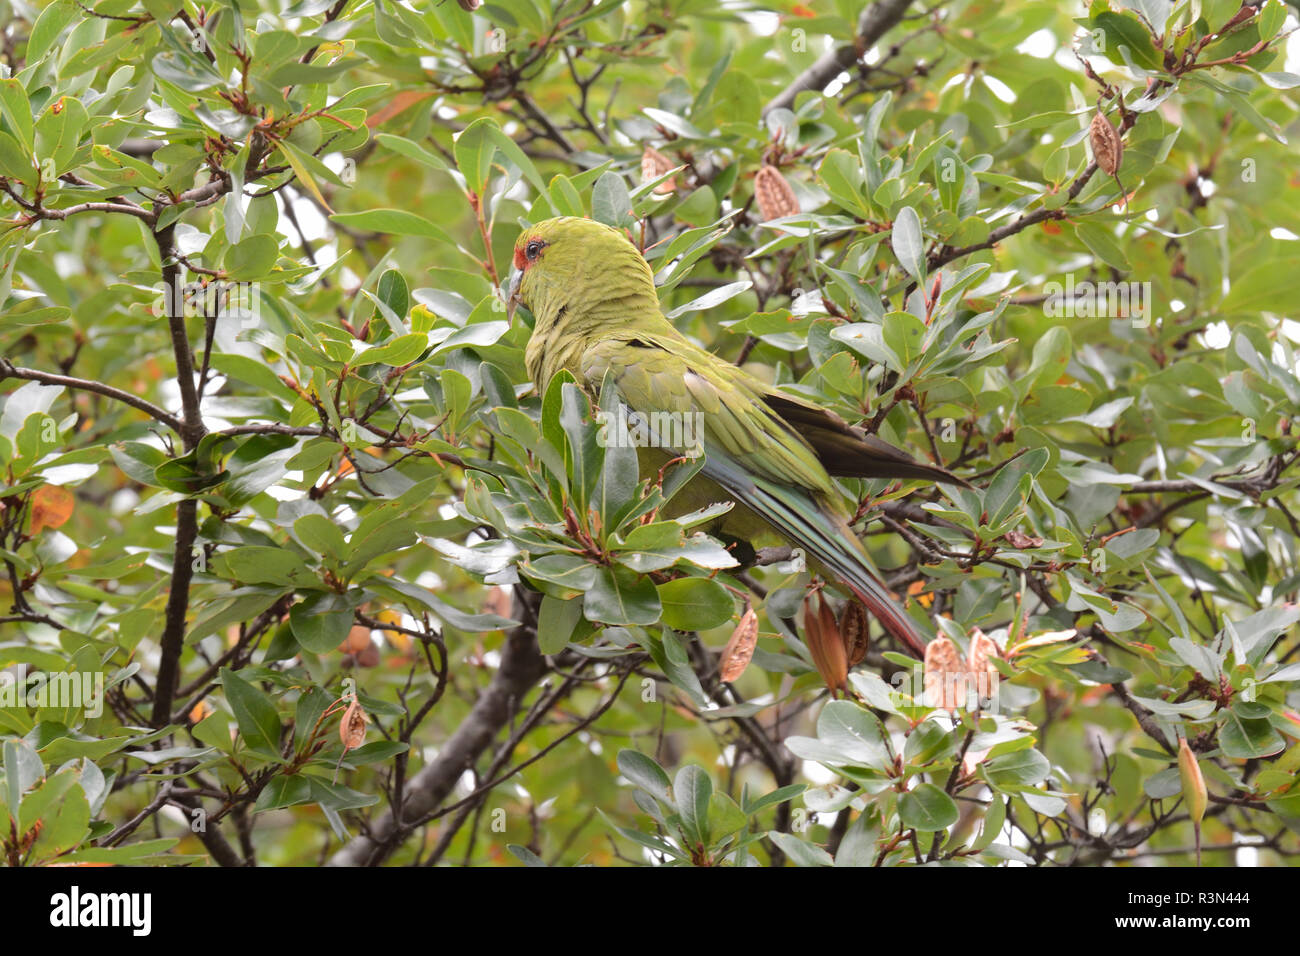 Slender-billed parakeet (Enicognathus leptorhynchus) Psittacidae endemic to Southern Chile and Argentina, Chiloe National Park, Cucao, Chiloe Island, X Lake District, Chile Stock Photo